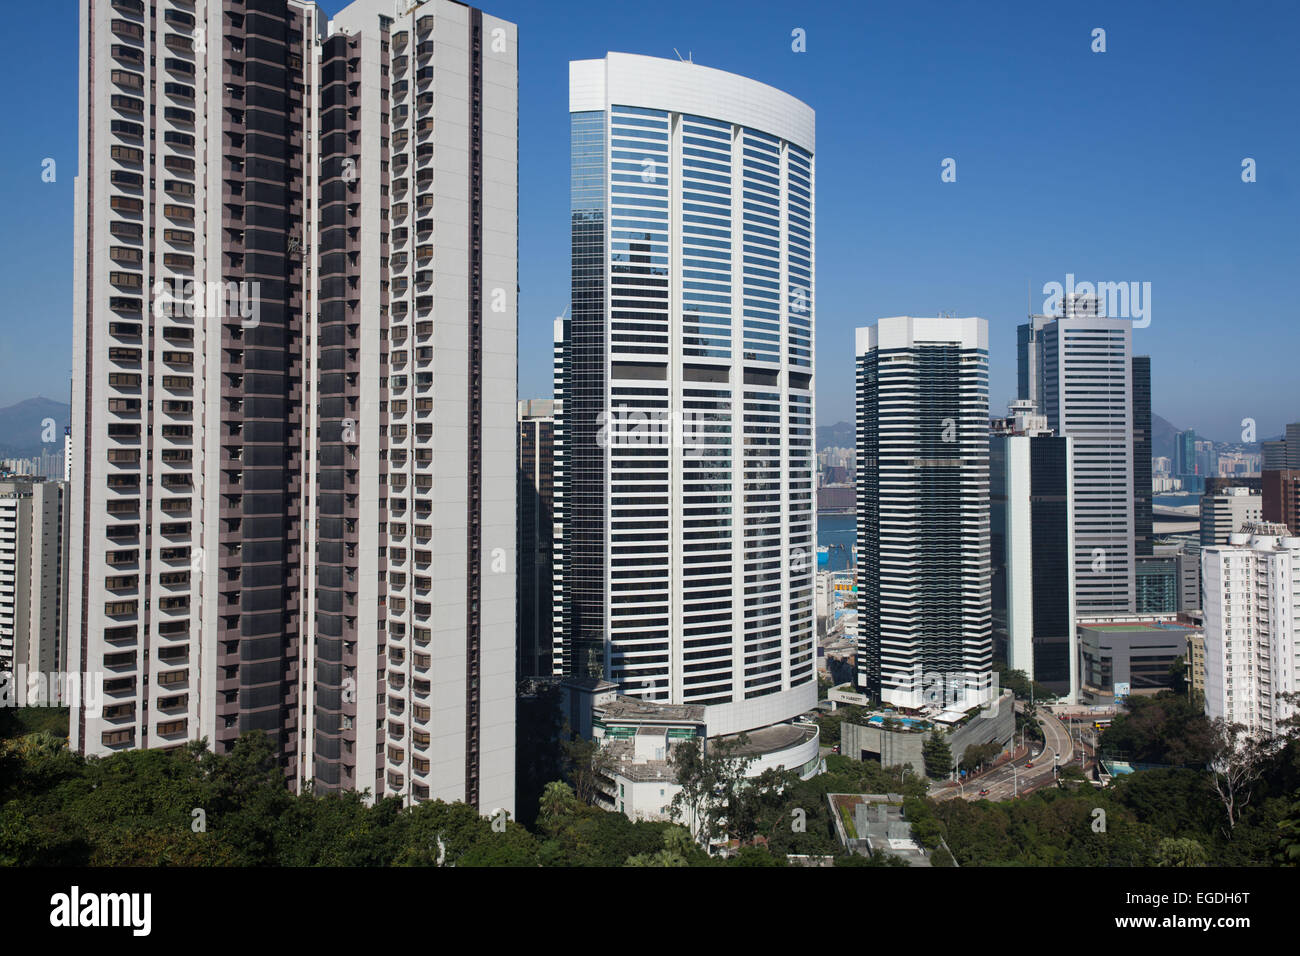 The view of Hong Kong and tall tower blocks seen from above Happy Valley. Stock Photo